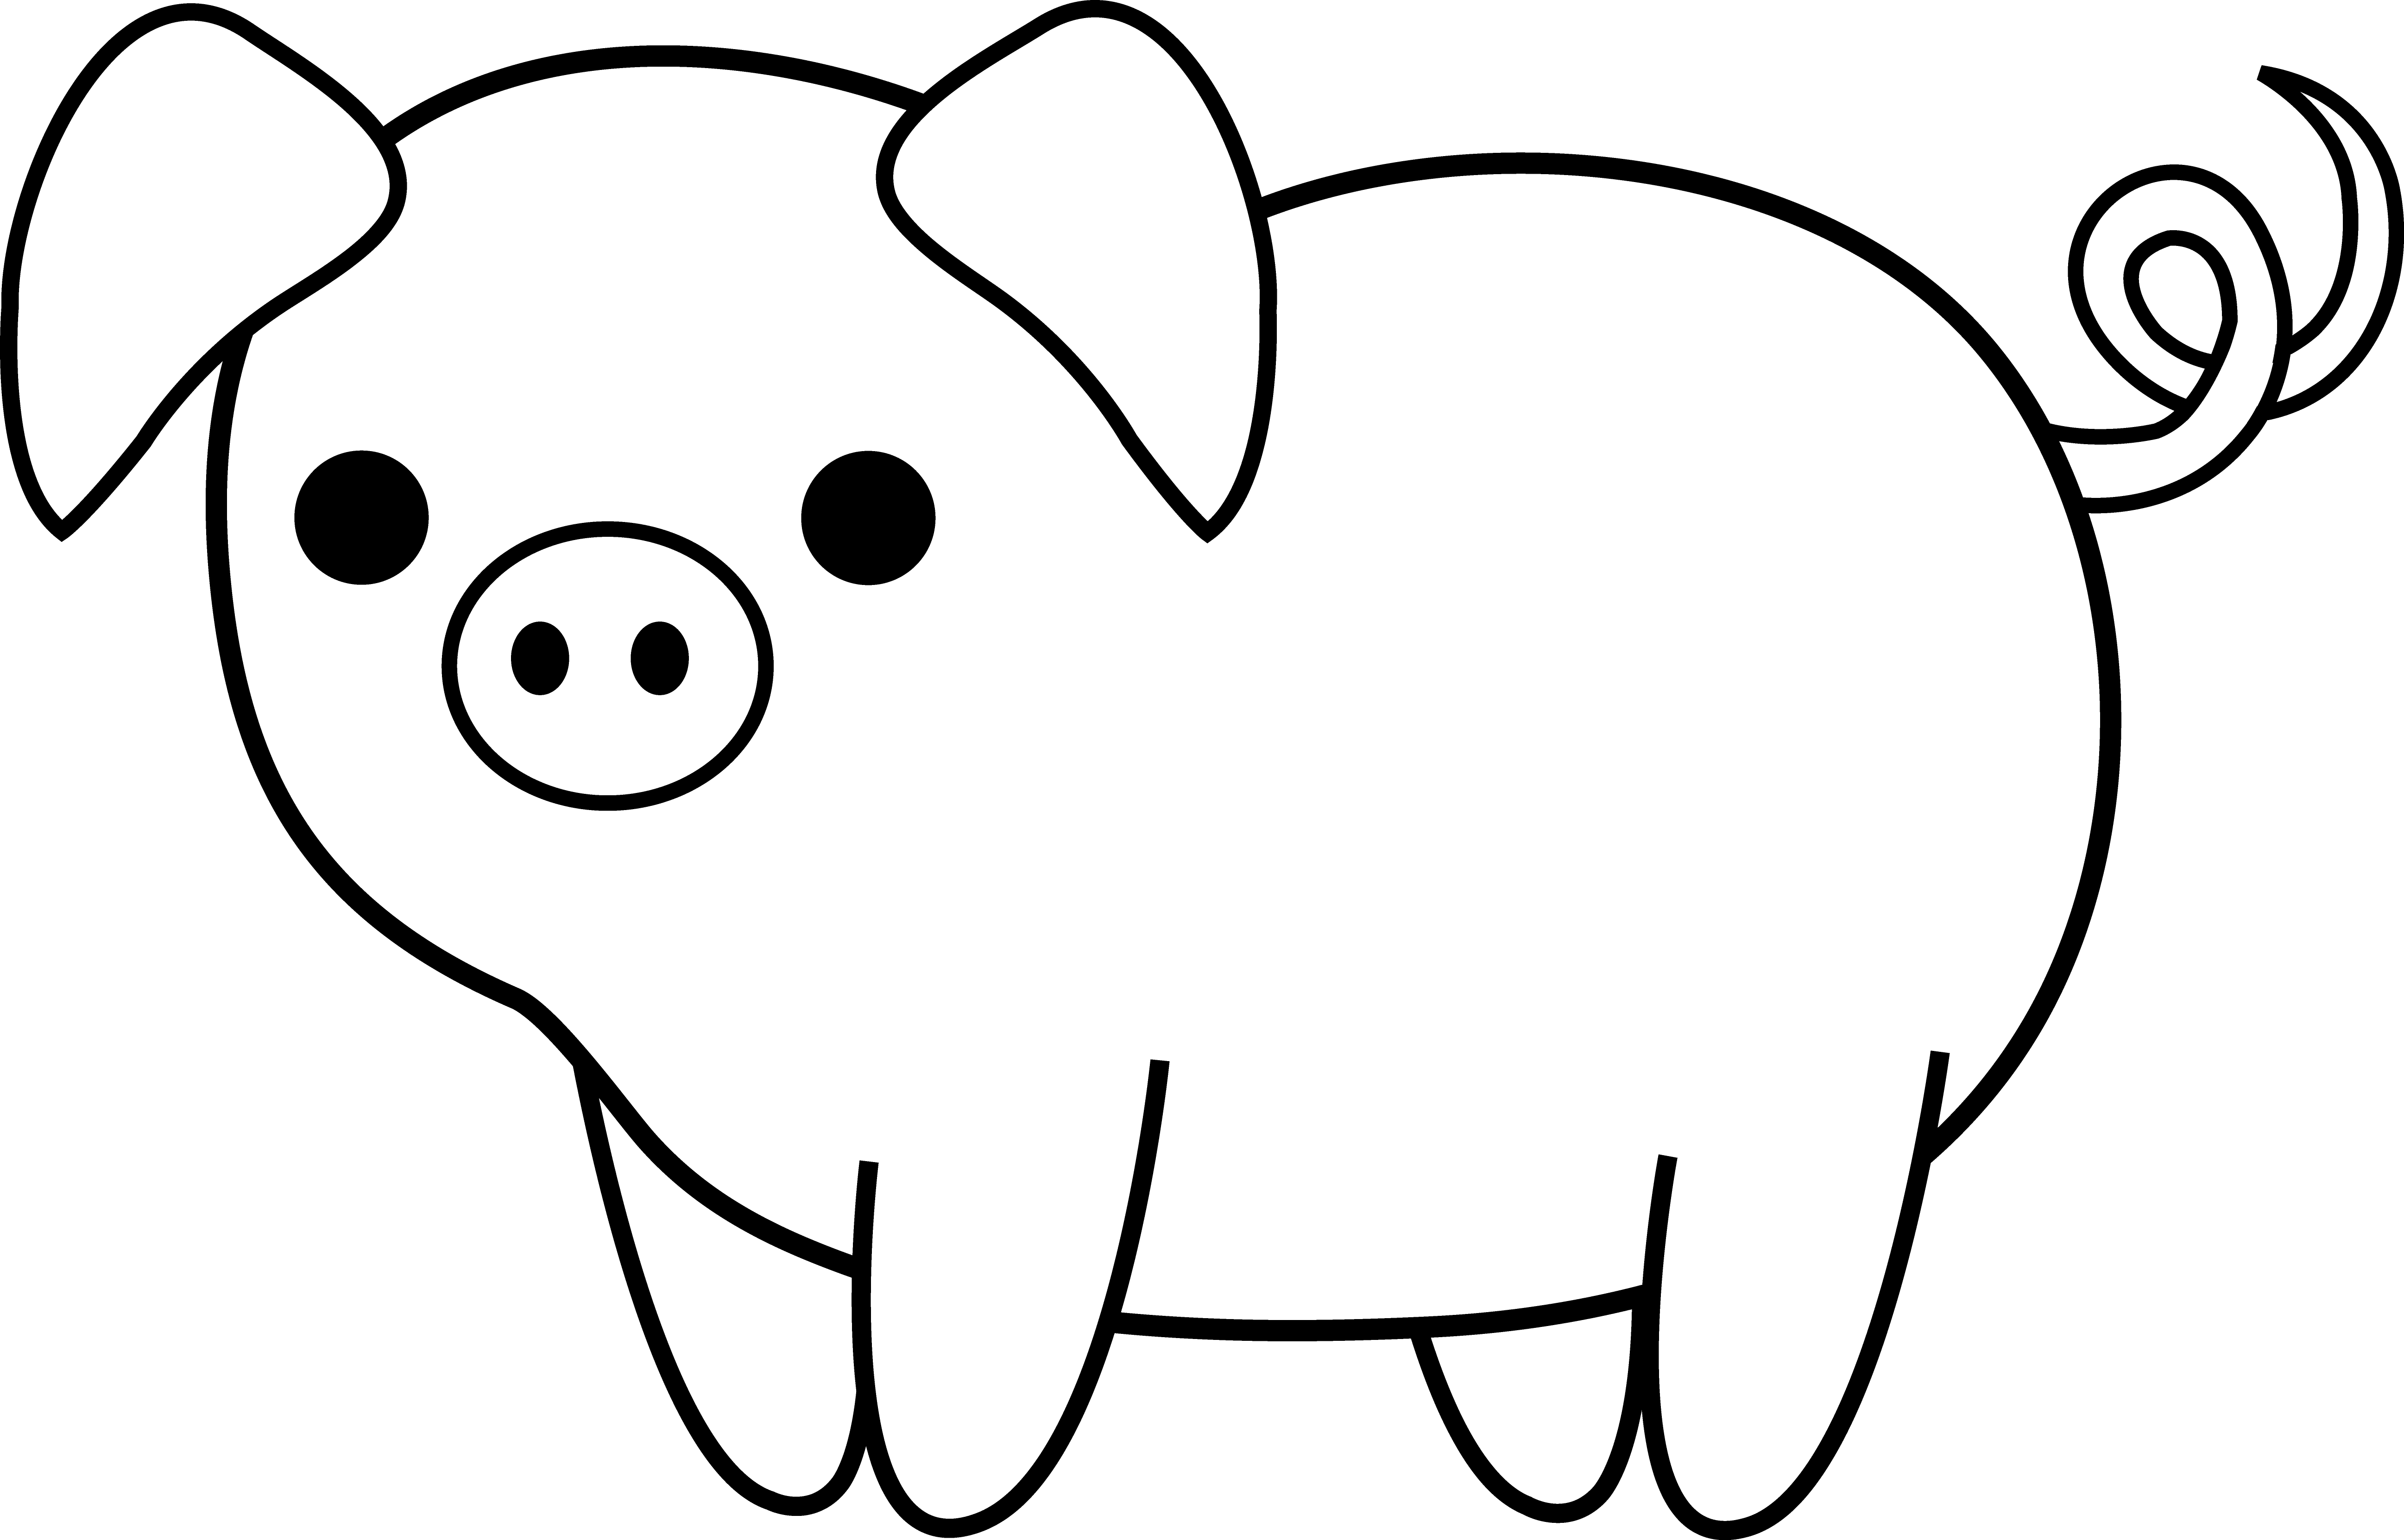 Pigs clipart easy.